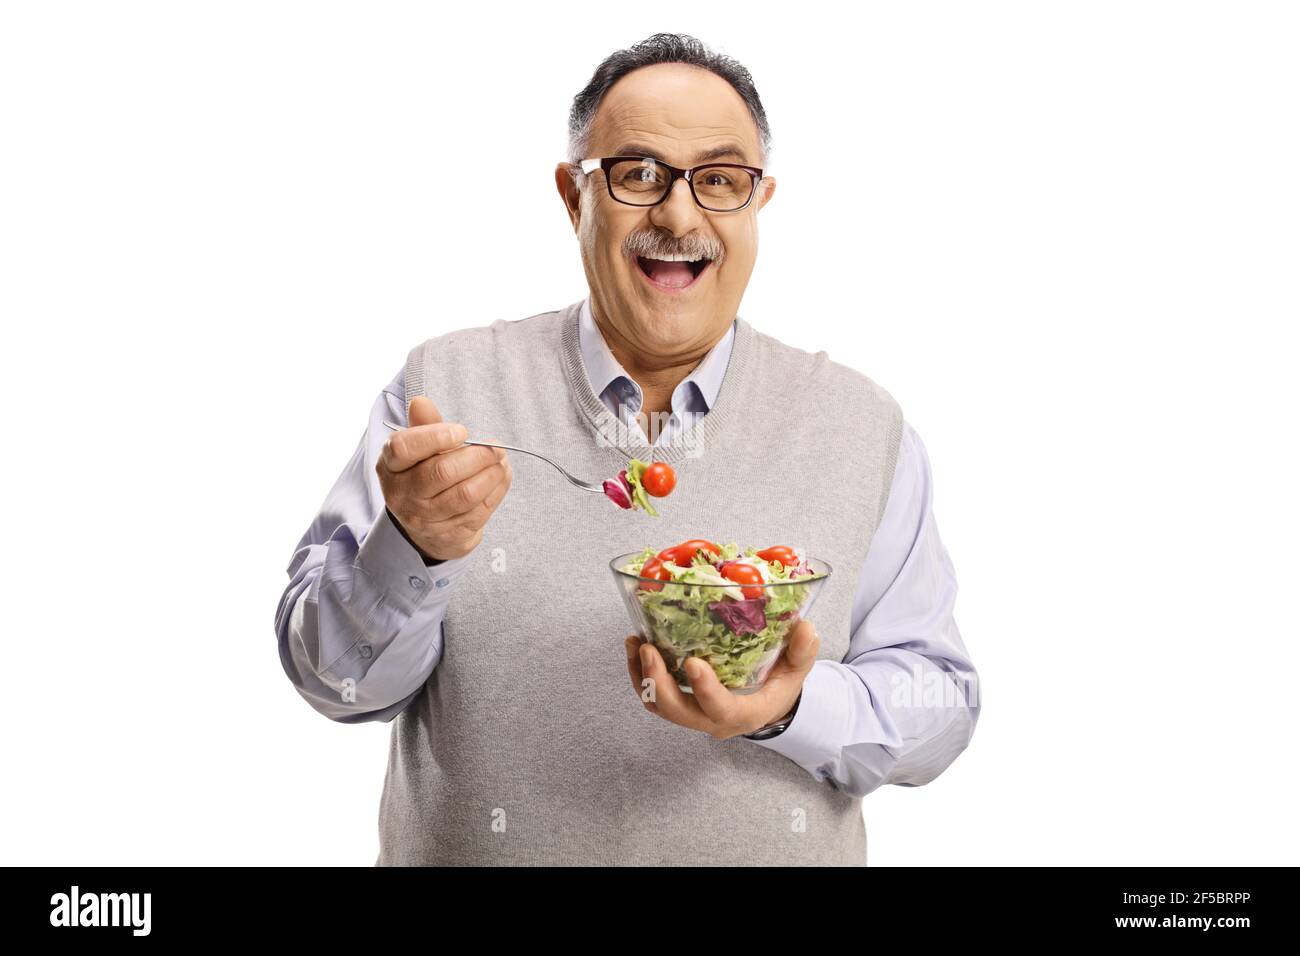 Happy mature man standing and eating a salad isolated on white background Stock Photo